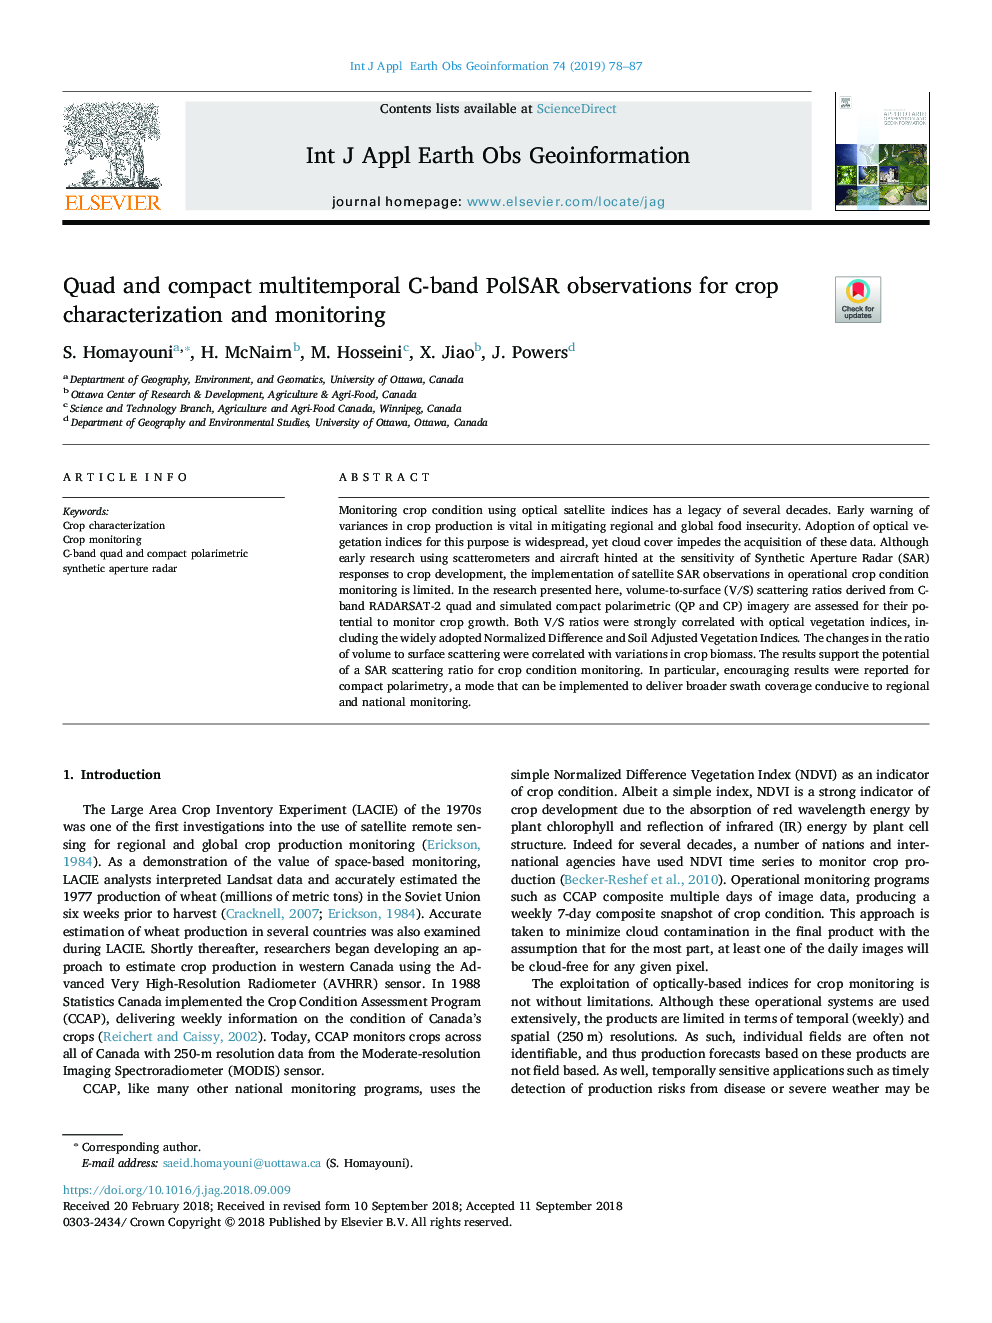 Quad and compact multitemporal C-band PolSAR observations for crop characterization and monitoring